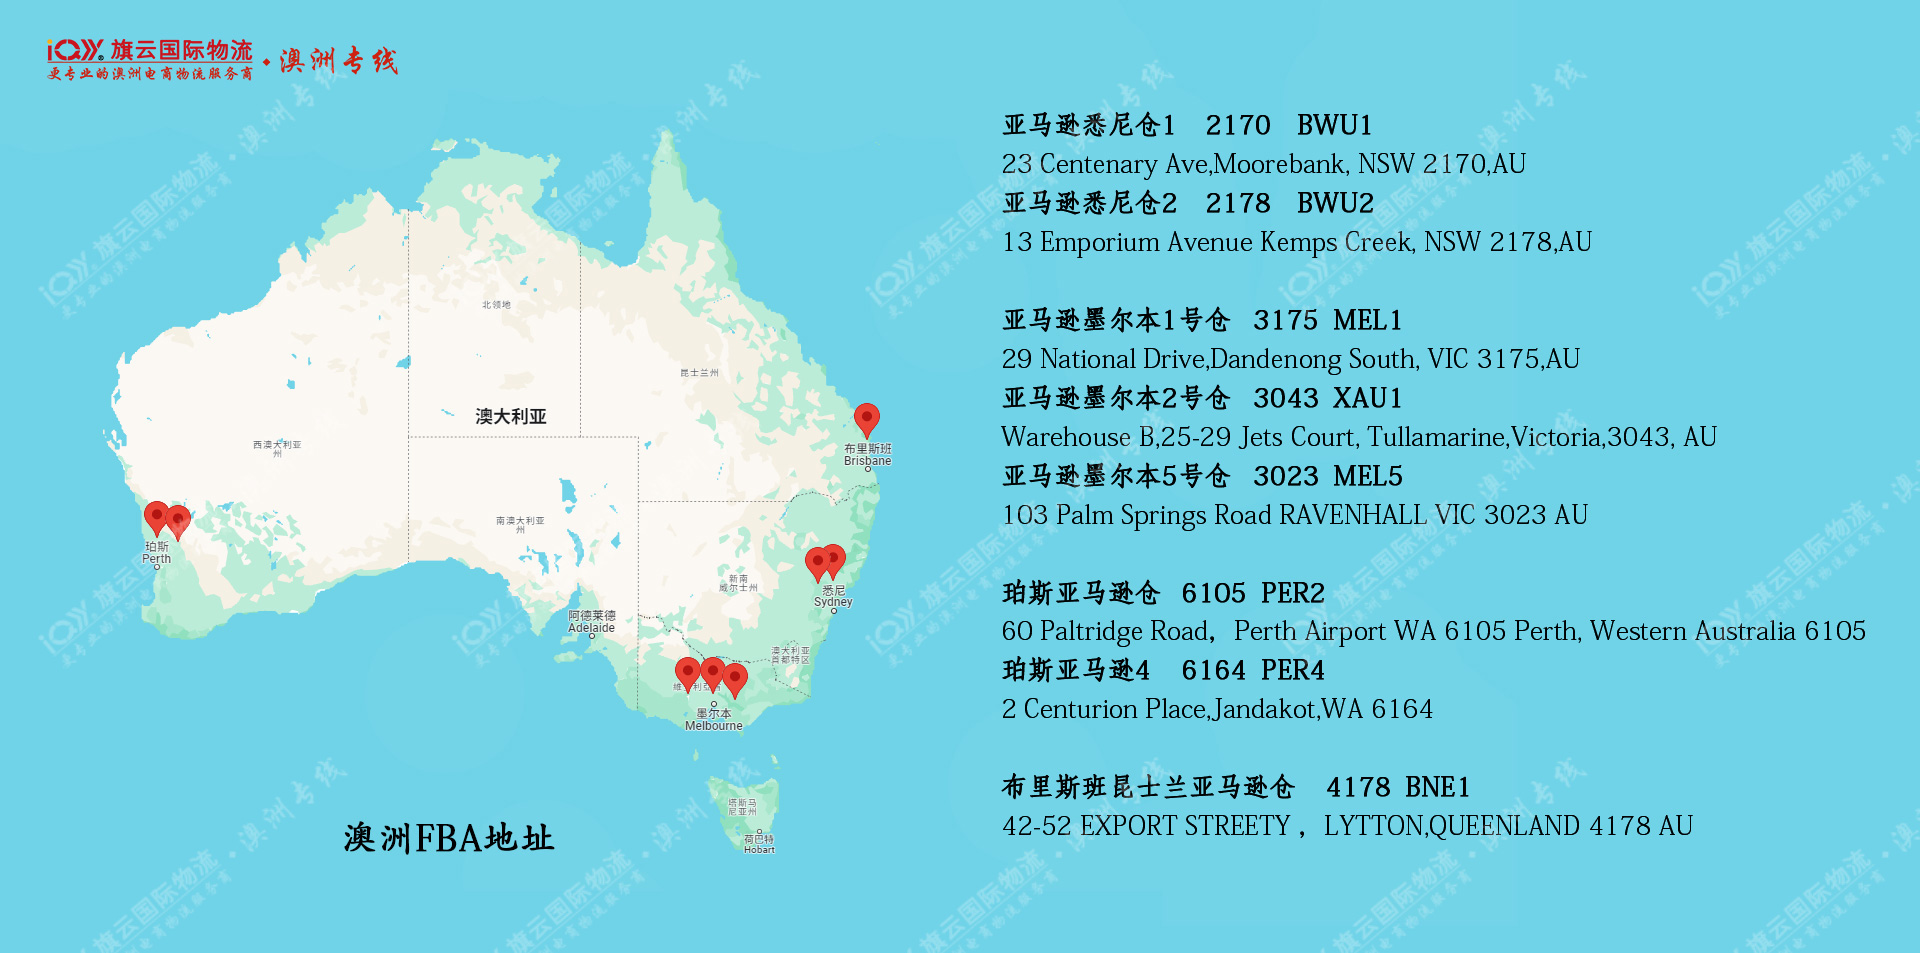 How many Amazon Australia FBA warehouses are there? Where is the address of the overseas warehouse in Australia? Map and detailed address